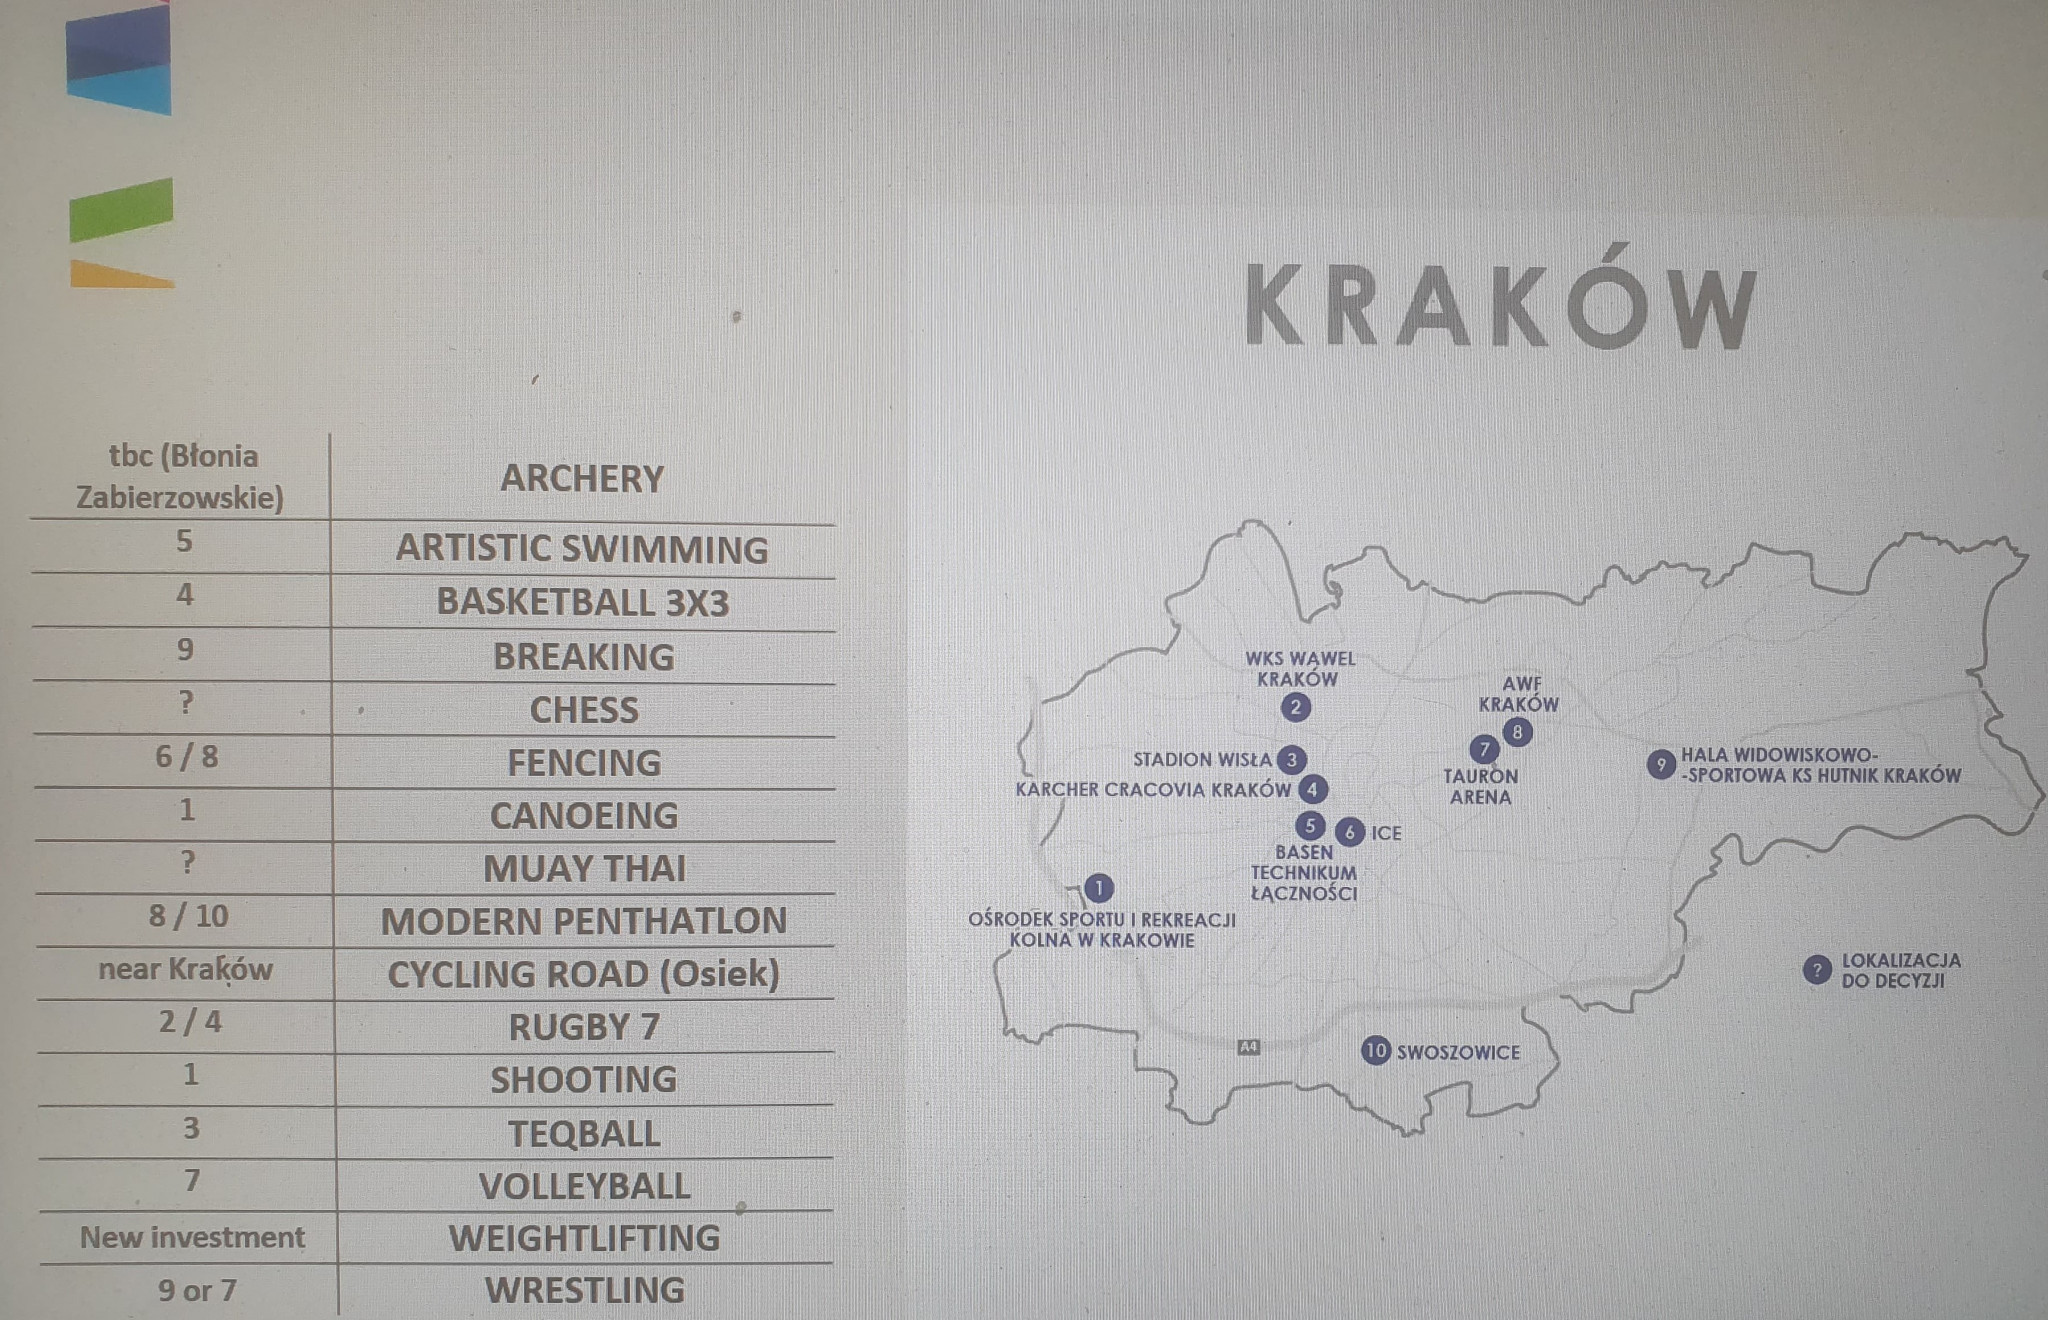 Krakow is expected to host the majority of events at the Games ©Polish Olympic Committee